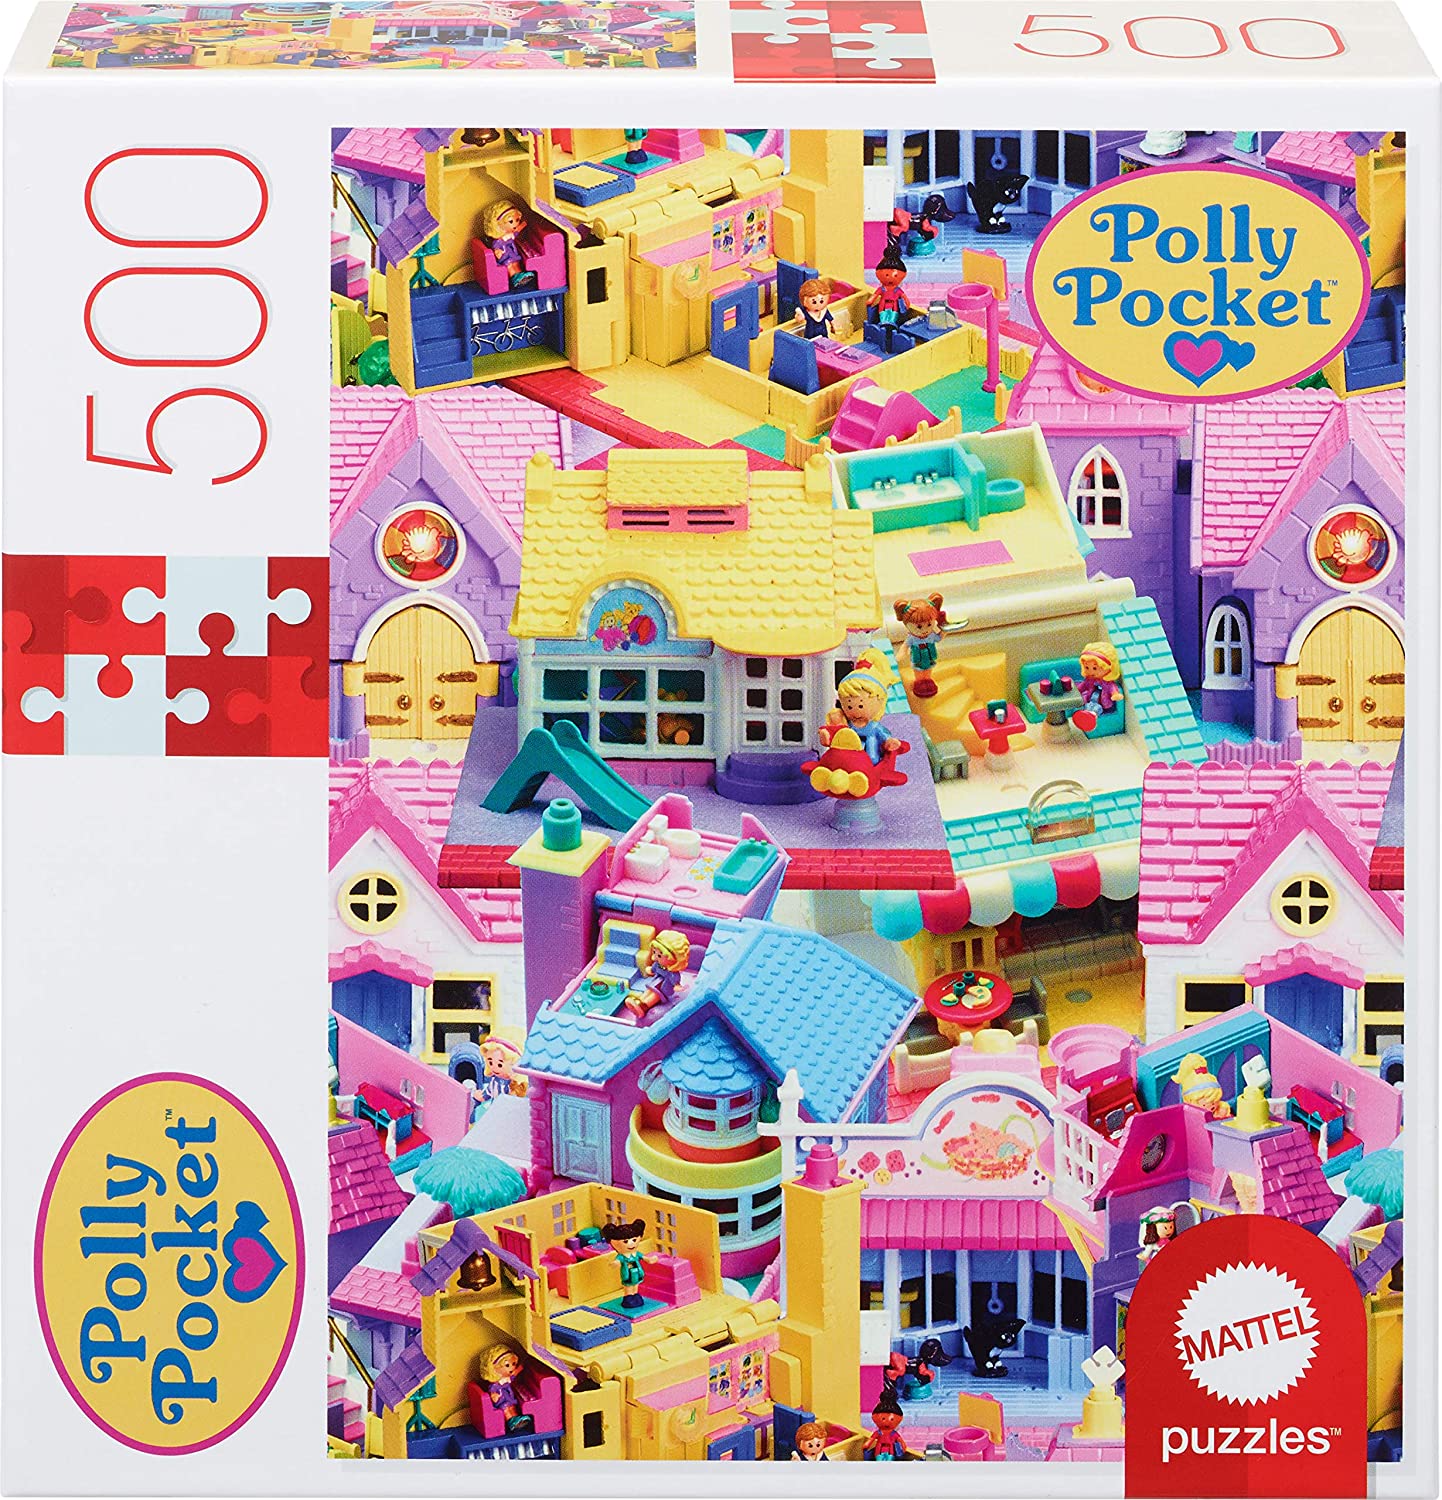 500-Piece Polly Pocket Playsets w/ Dolls Mattel Jigsaw Puzzle w/ Mini-Poster $4.04 & More + Free Shipping w/ Prime or FS on $25+